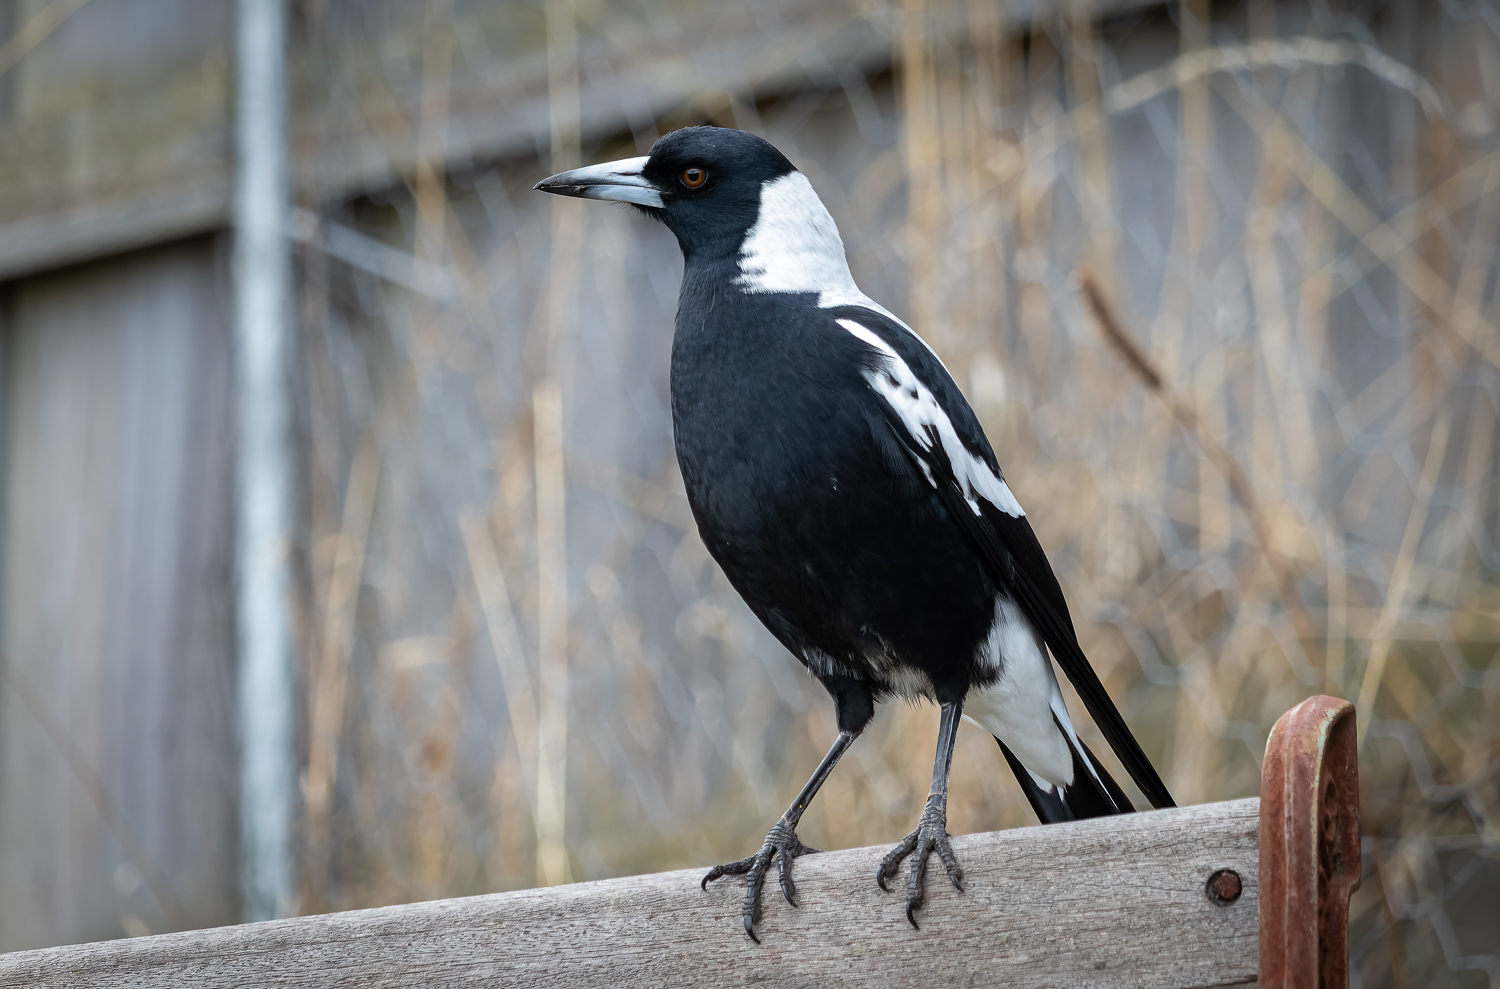 A black and white magpie perched on the back of a wooden bench in front of tall dead grass and a wooden fence